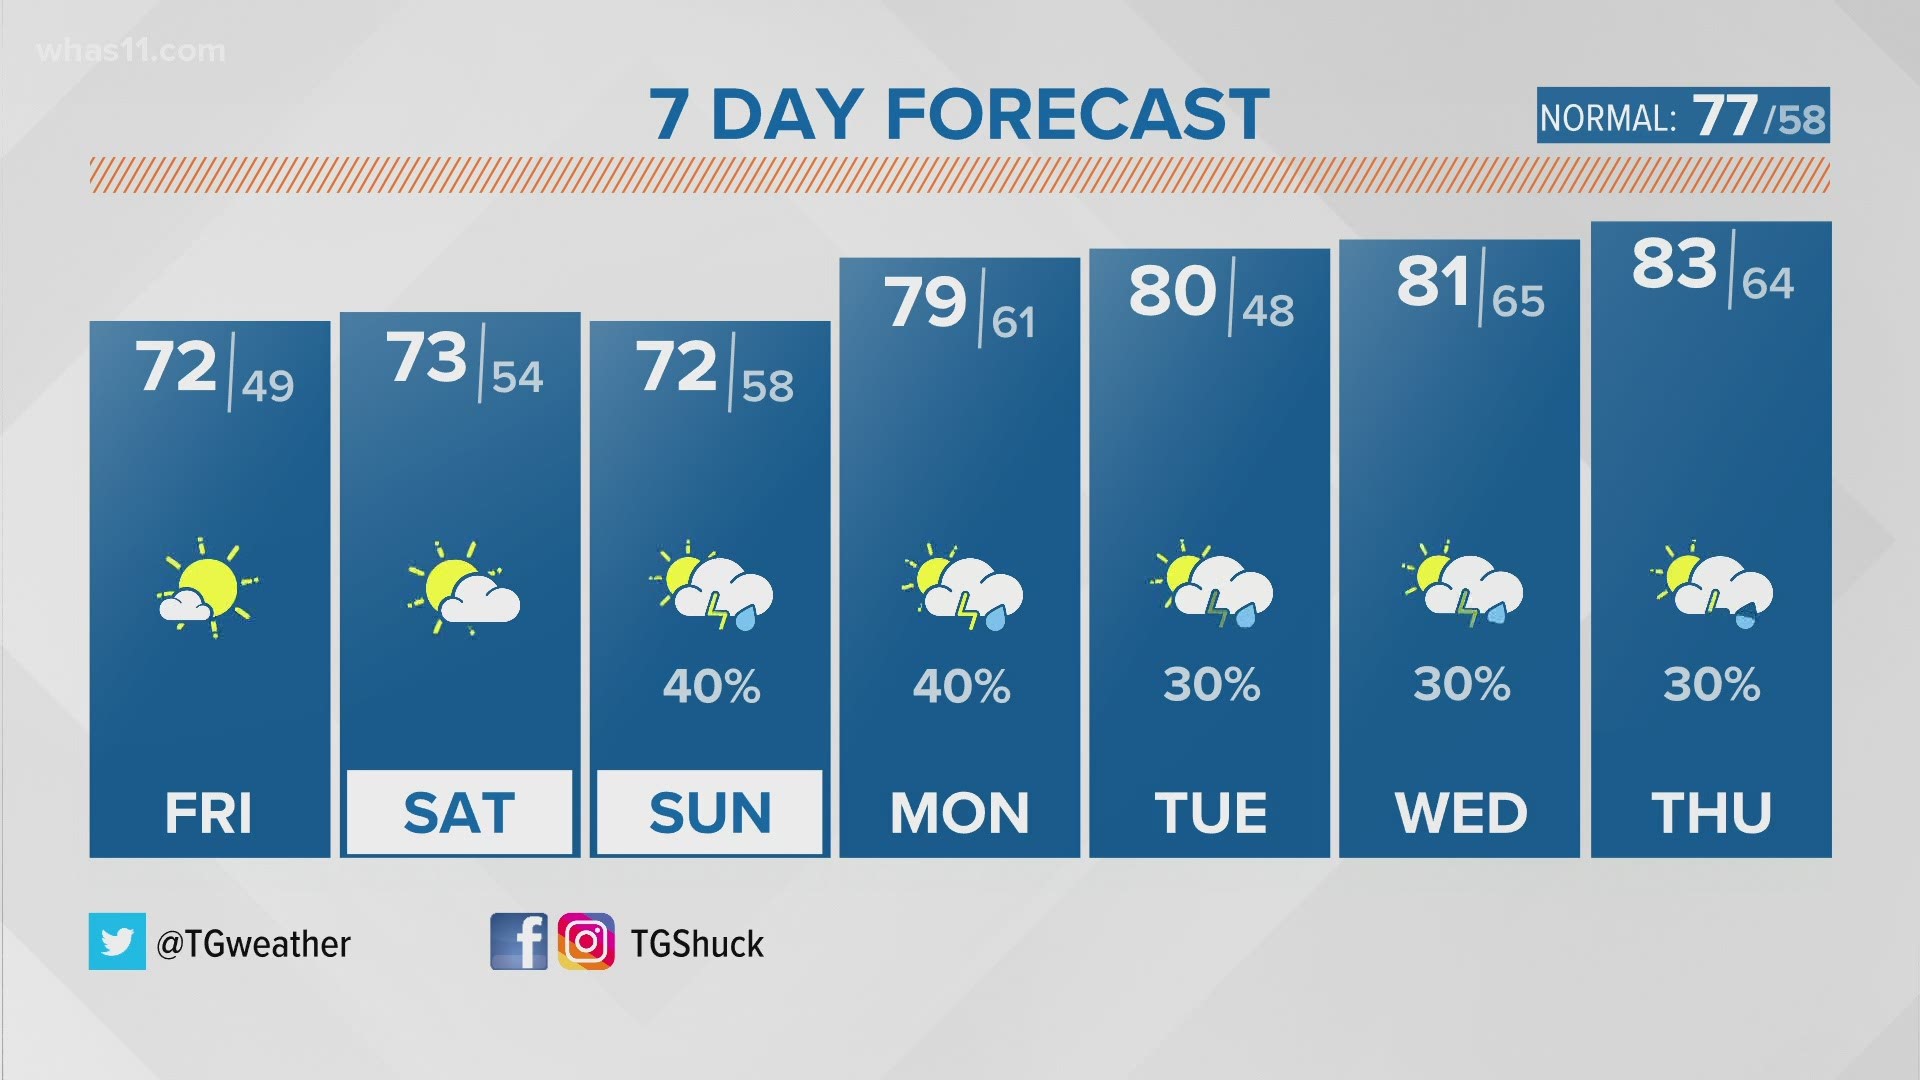 It's a gradual warming trend for the rest of this week into next as rain returns.